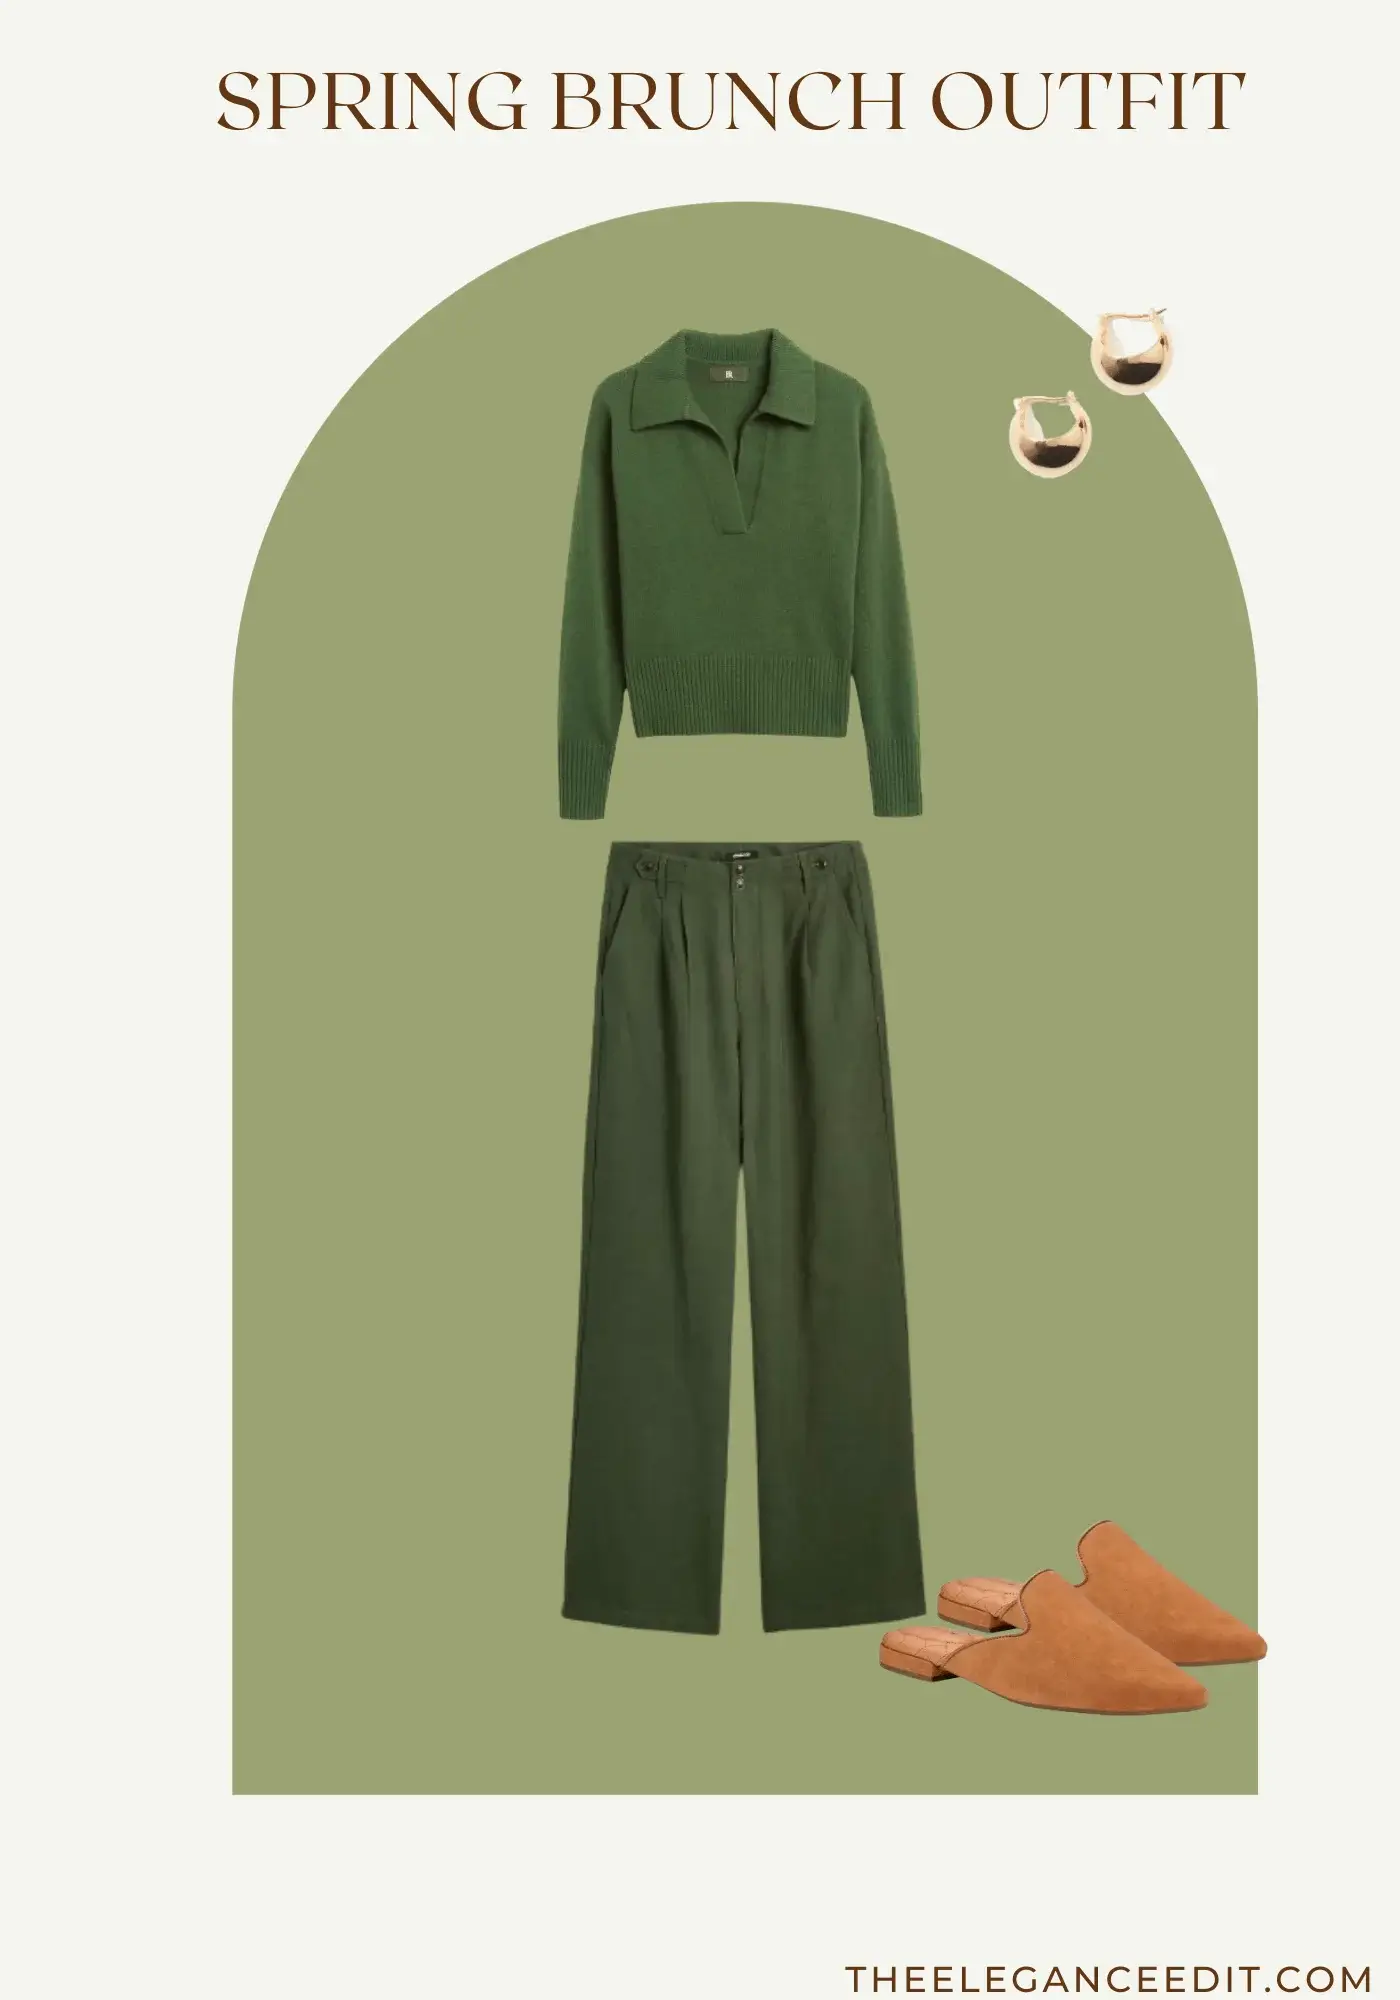 Monochrome Spring Brunch Outfit with green trousers and green polo sweater